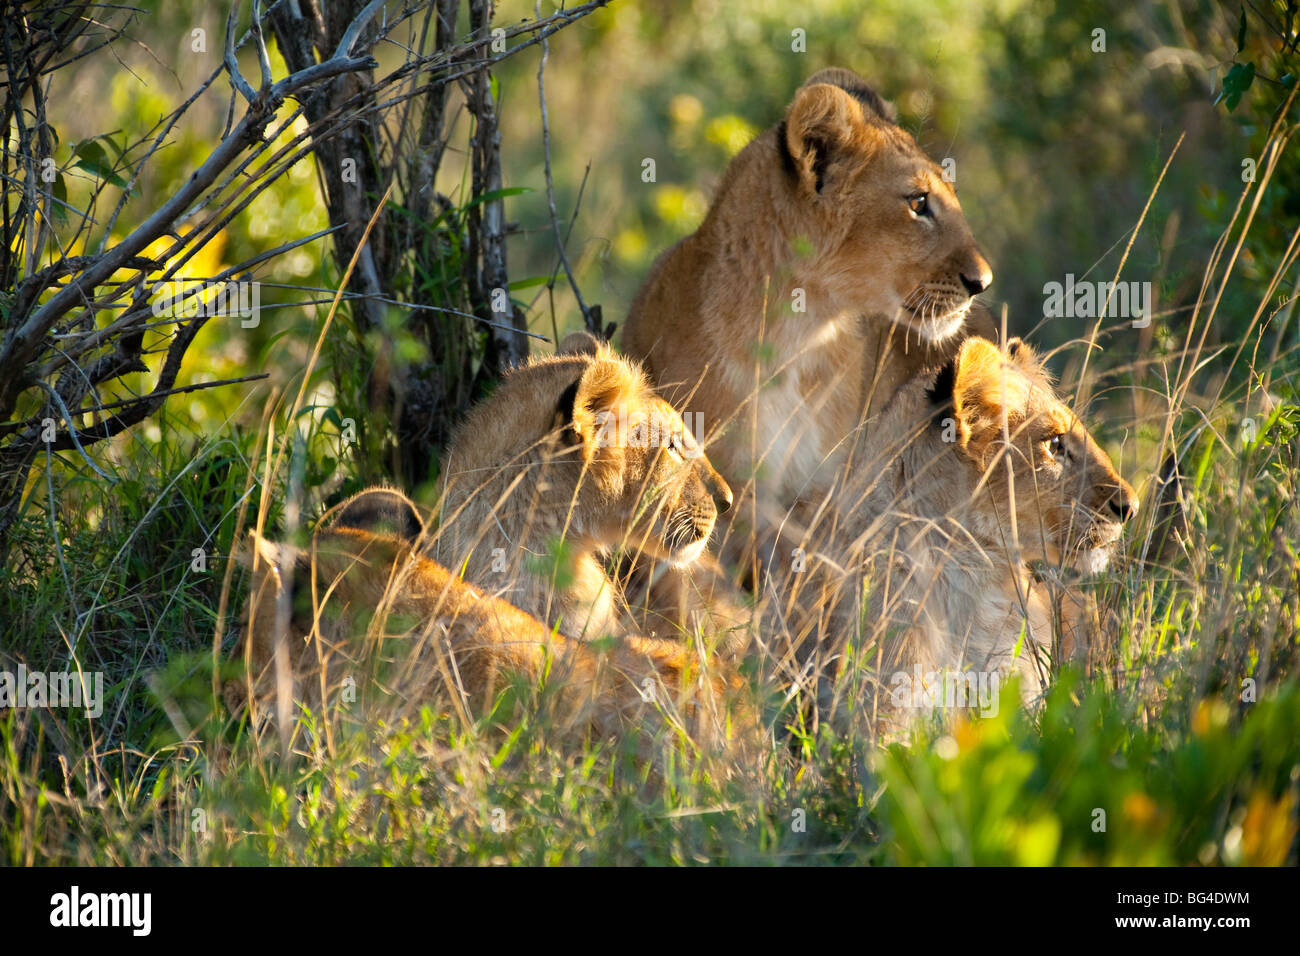 African lion family in Kenya forest Stock Photo